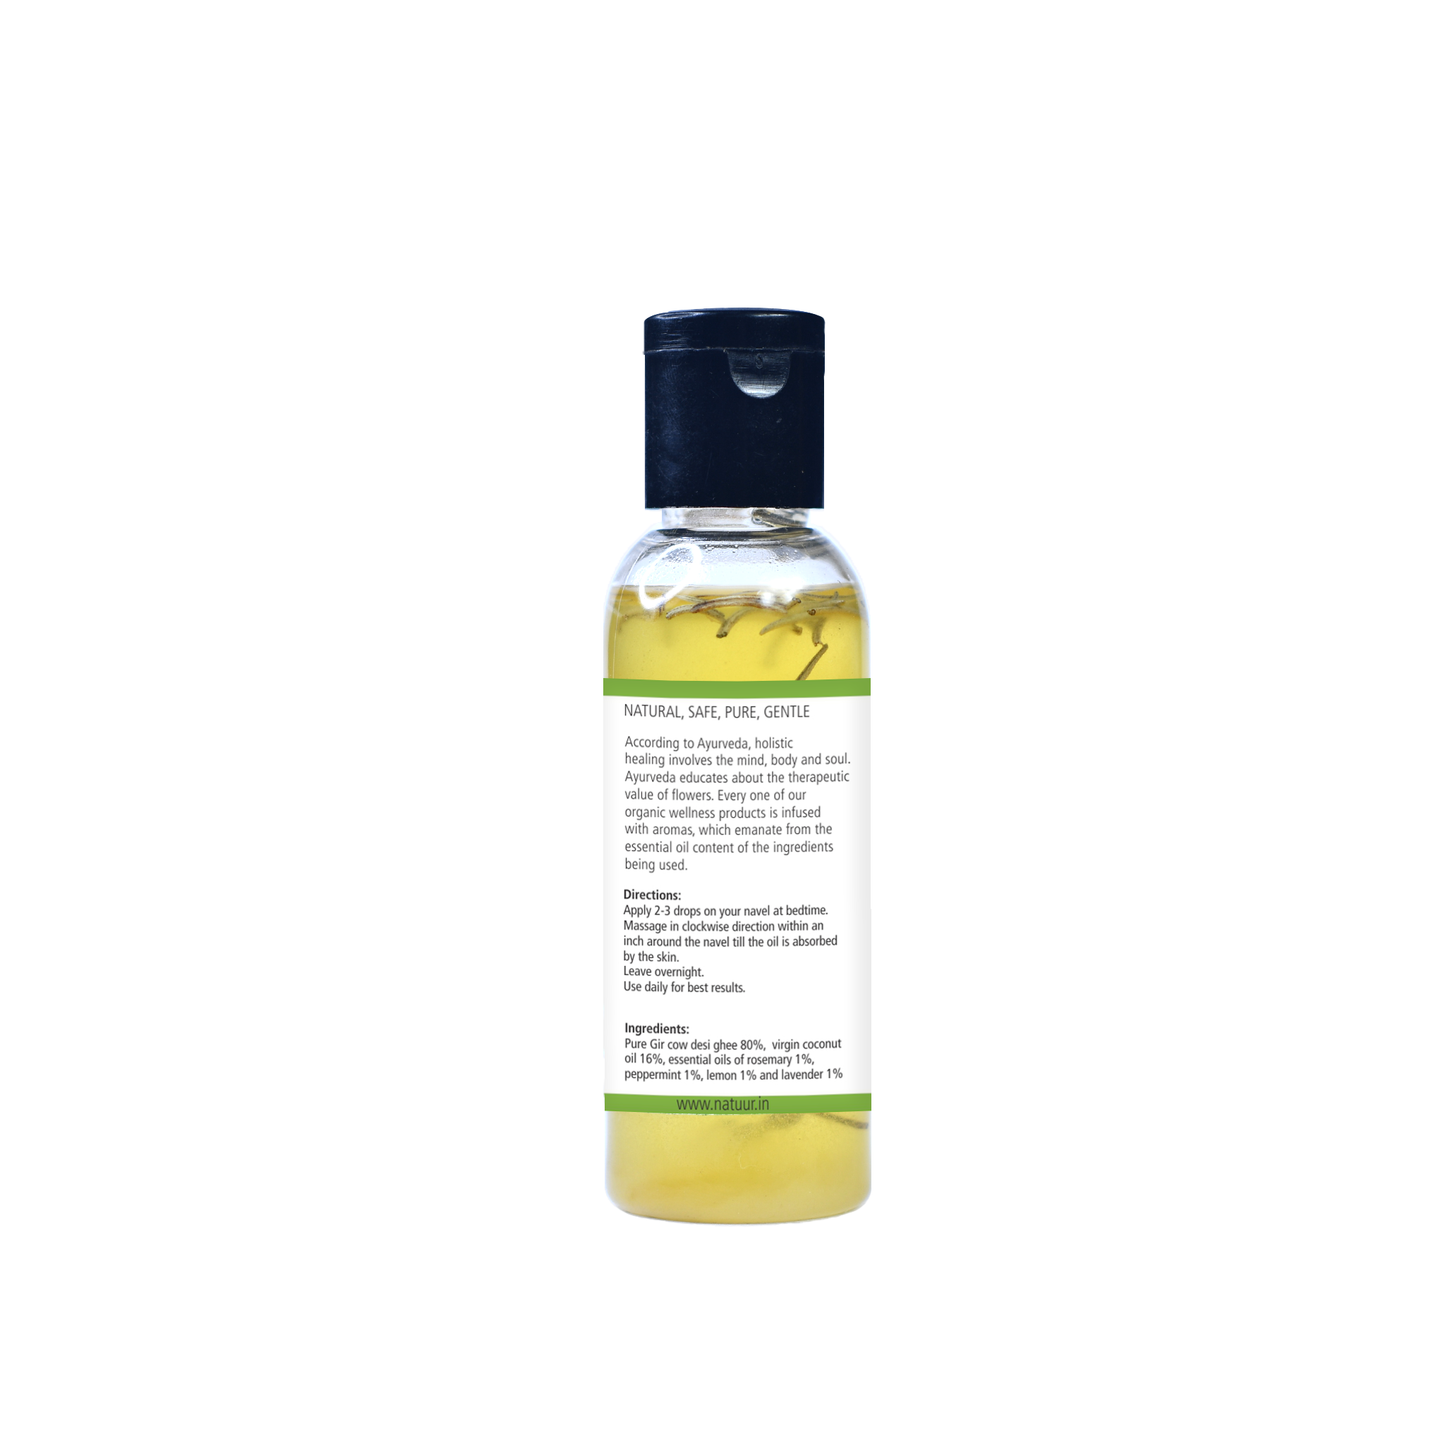 Belly Button Oil for Brain & Memory(50ml) - Natuur.in